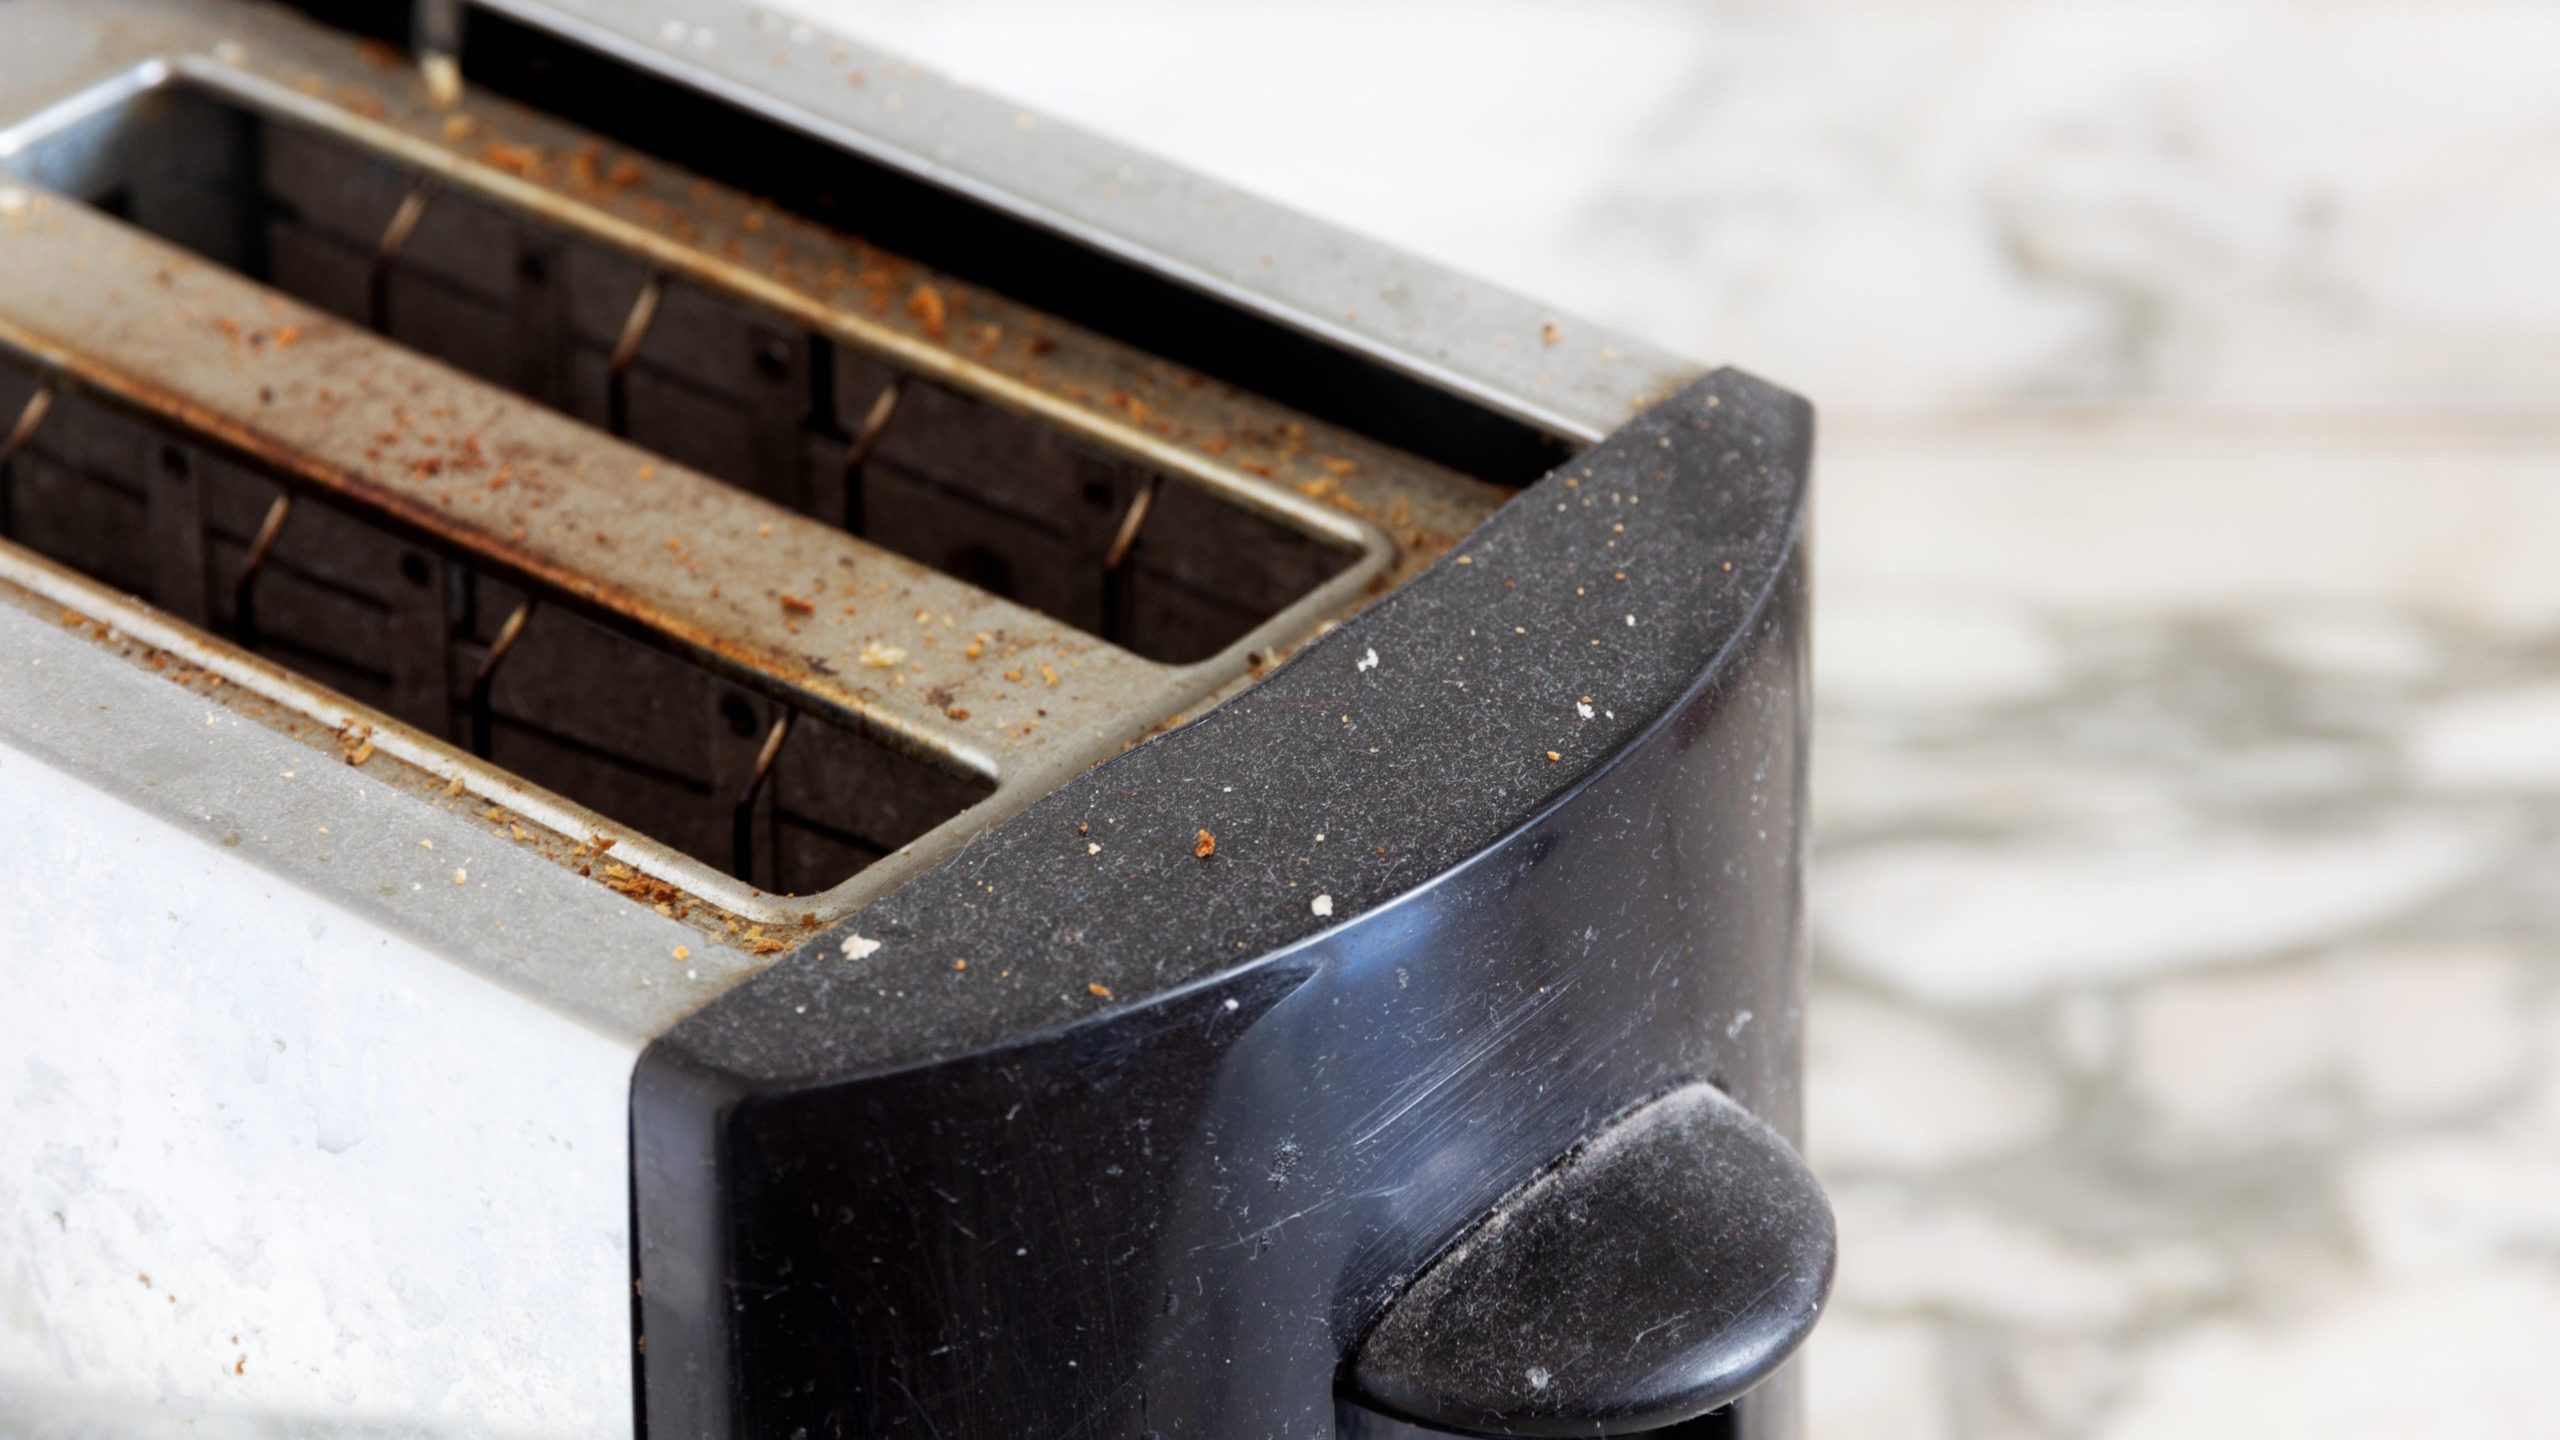 How to Clean Your Toaster the Right Way